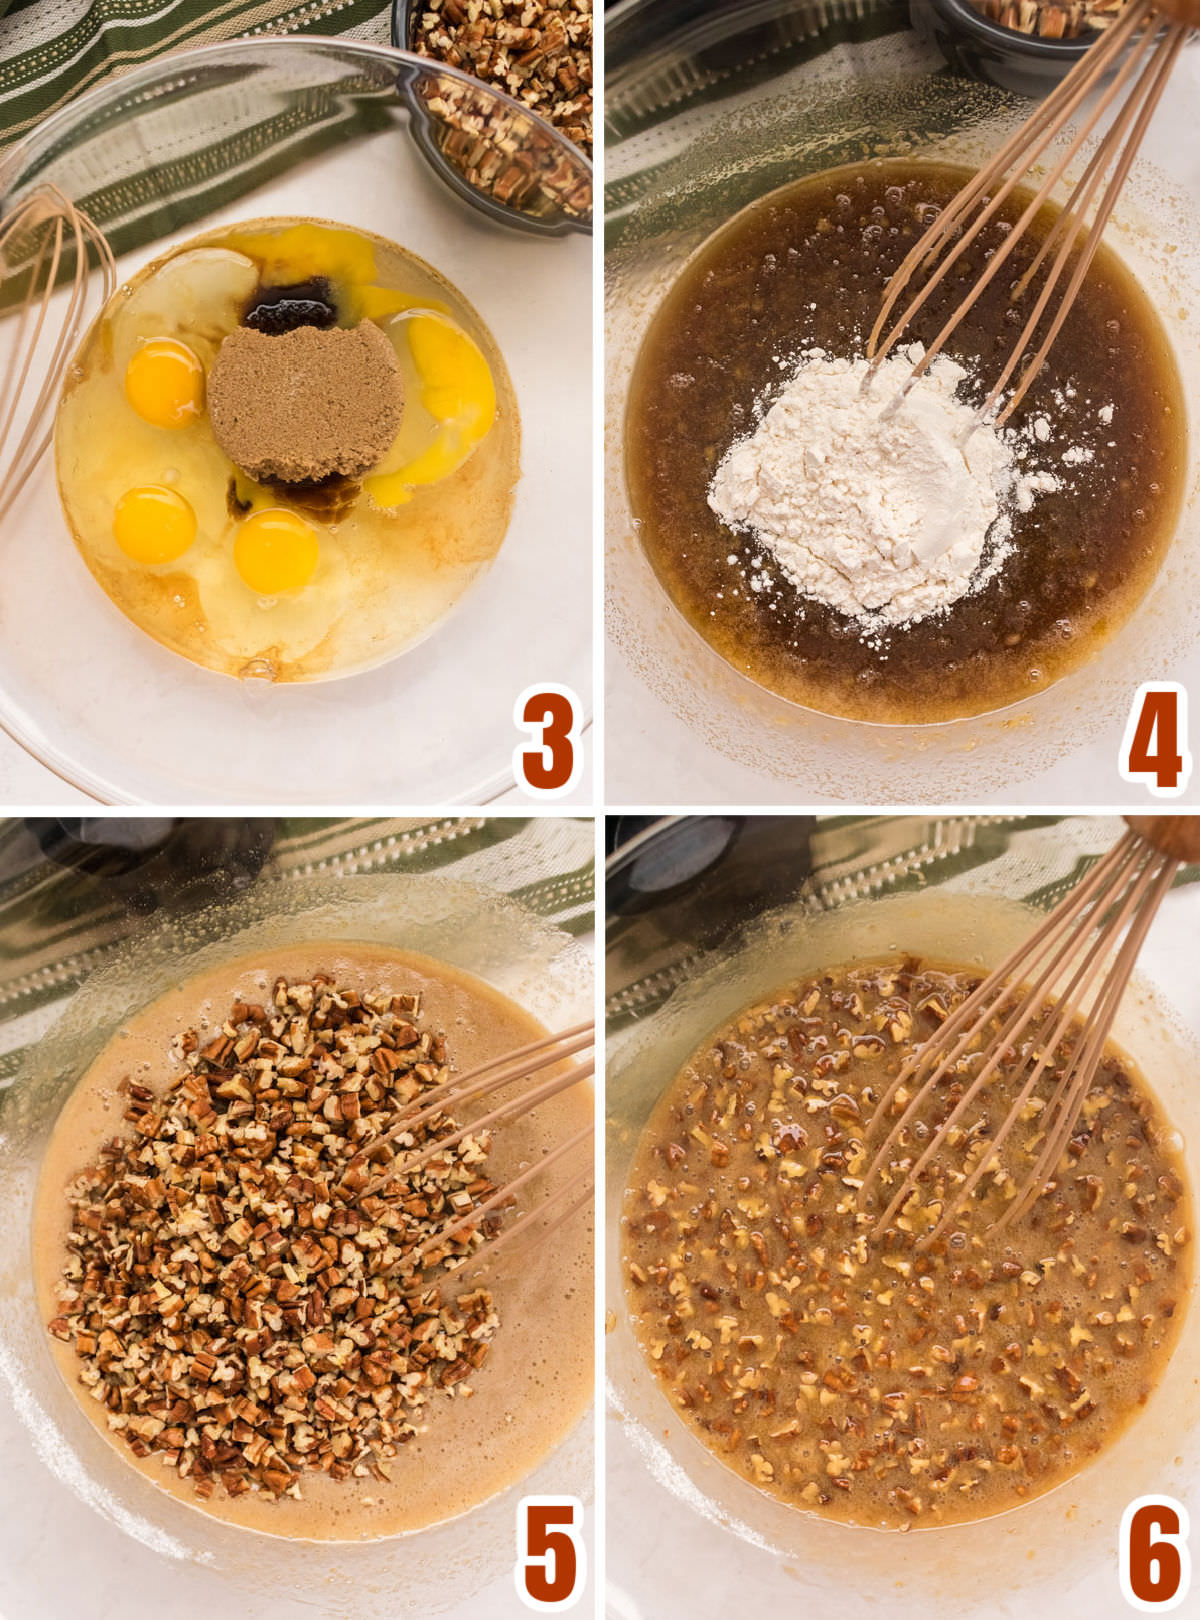 Collage image showing the steps for making the Pecan Pie Filing for the cookie bars.